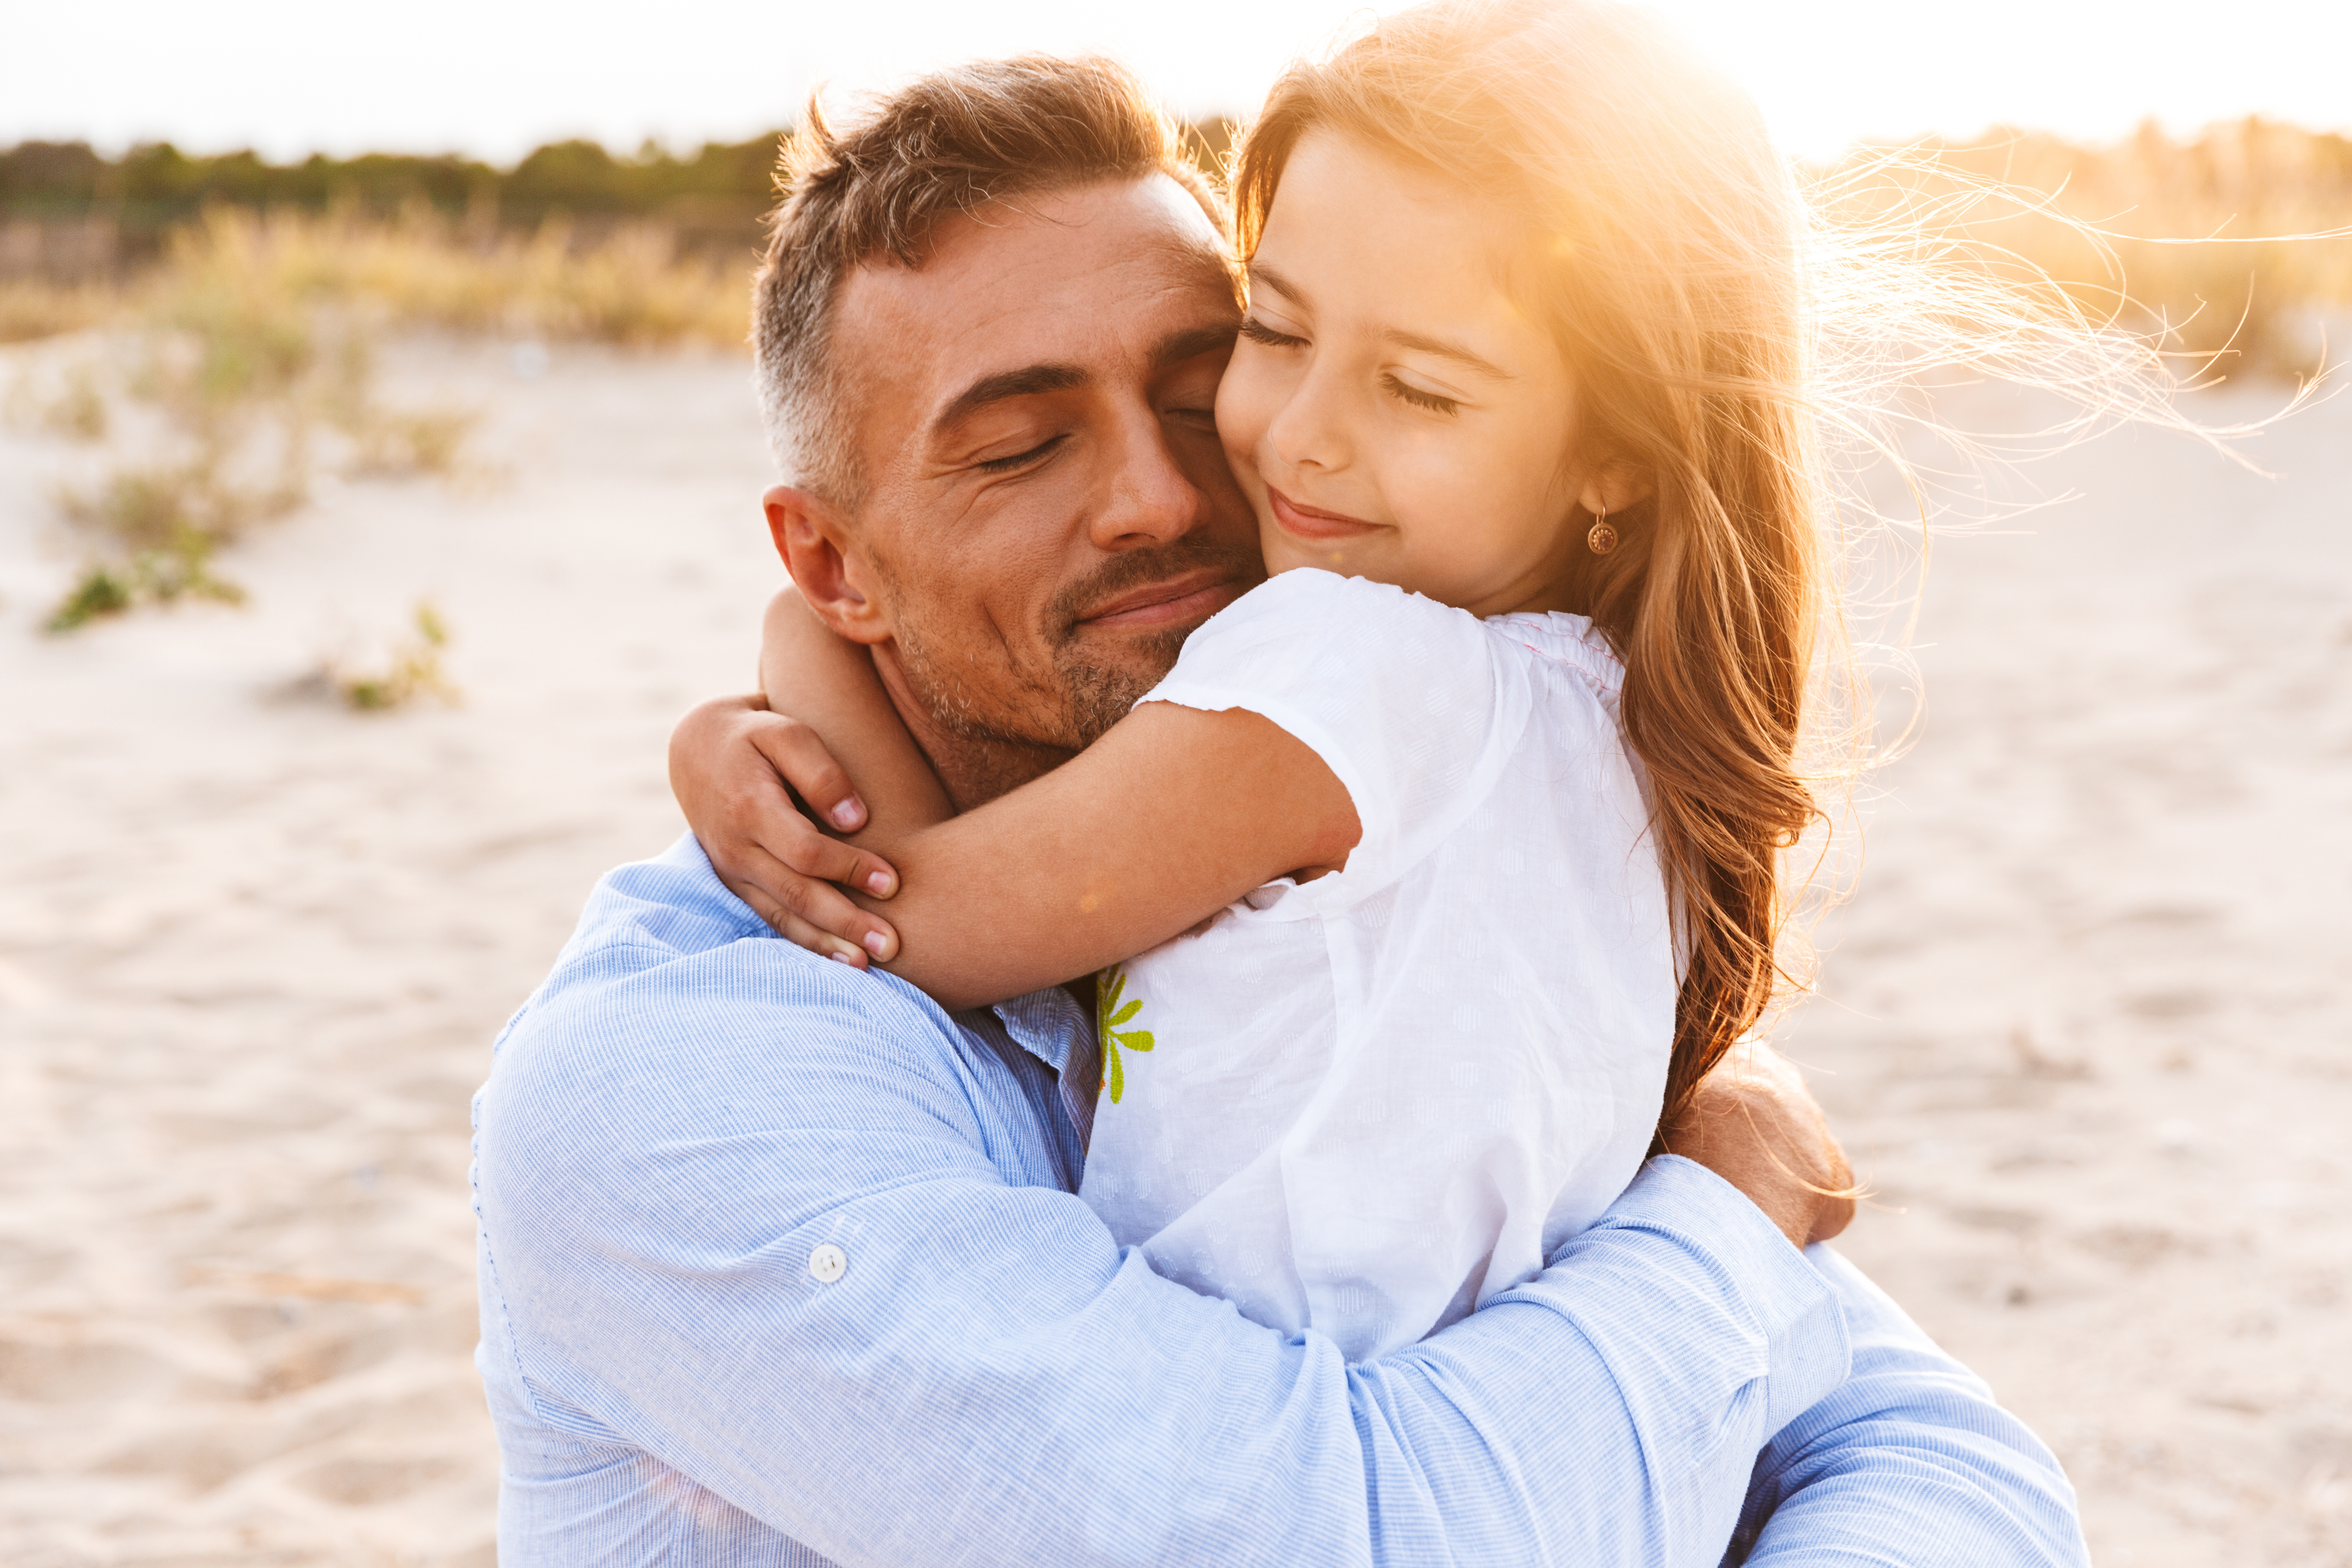 Happy father hugging his little daughter on the beach | Source: Shutterstock